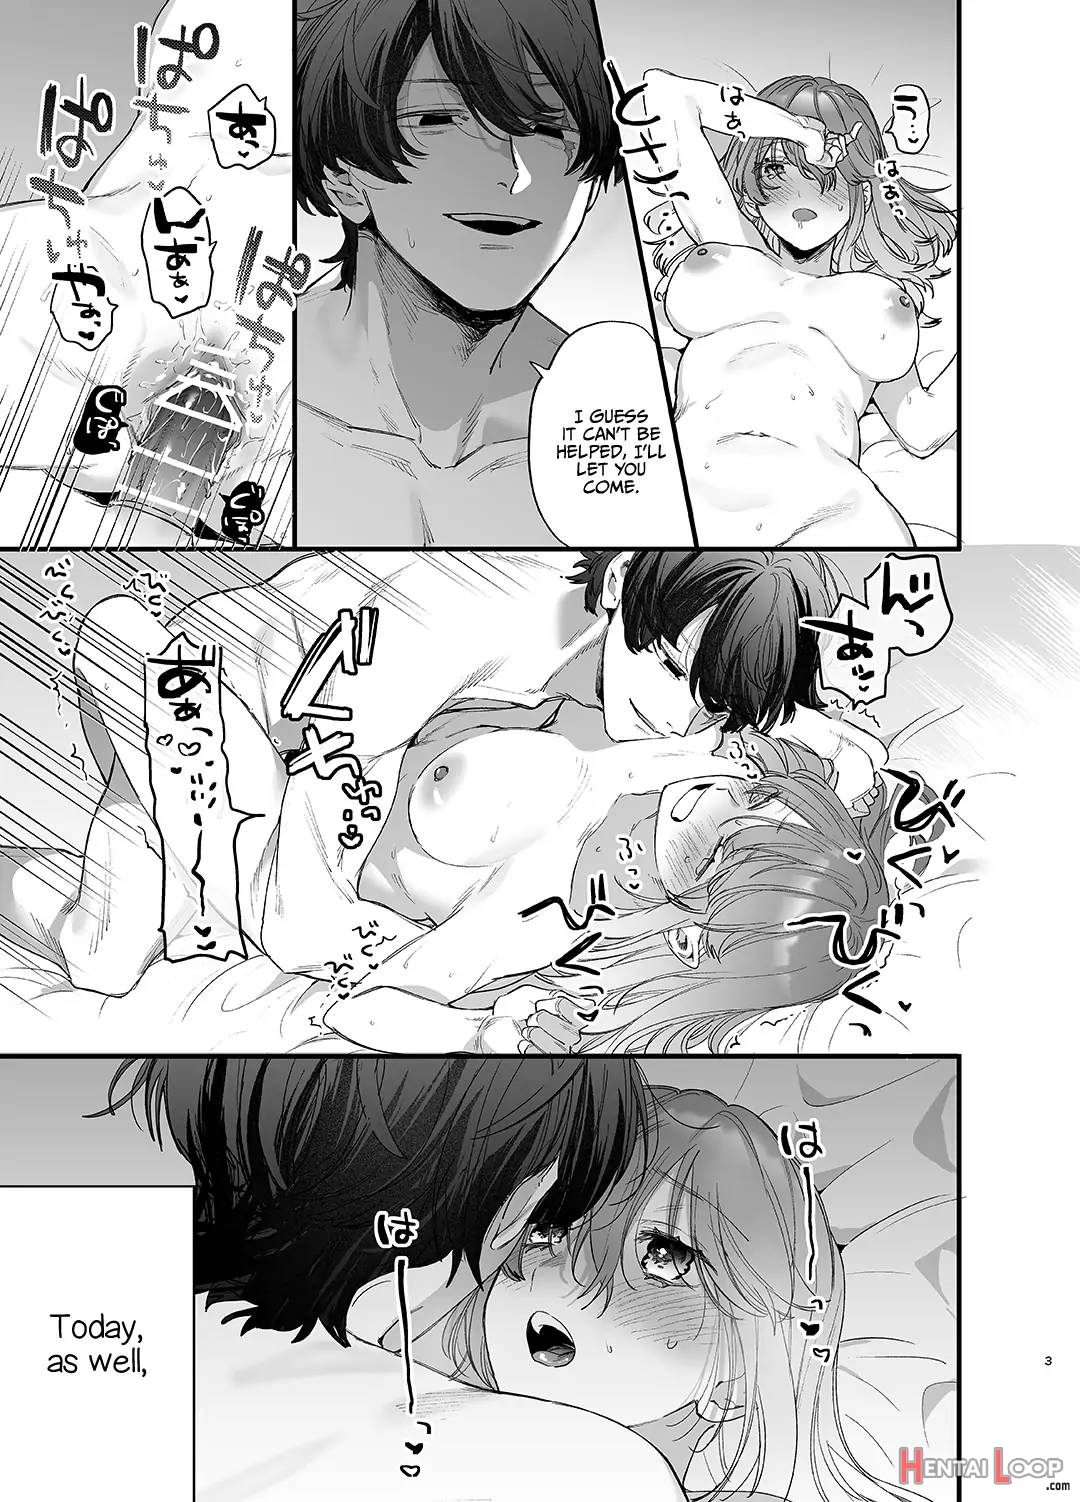 Until The Trashiest Boy Toy Exorcist Ren-kun Crushes Me In His Embrace page 3